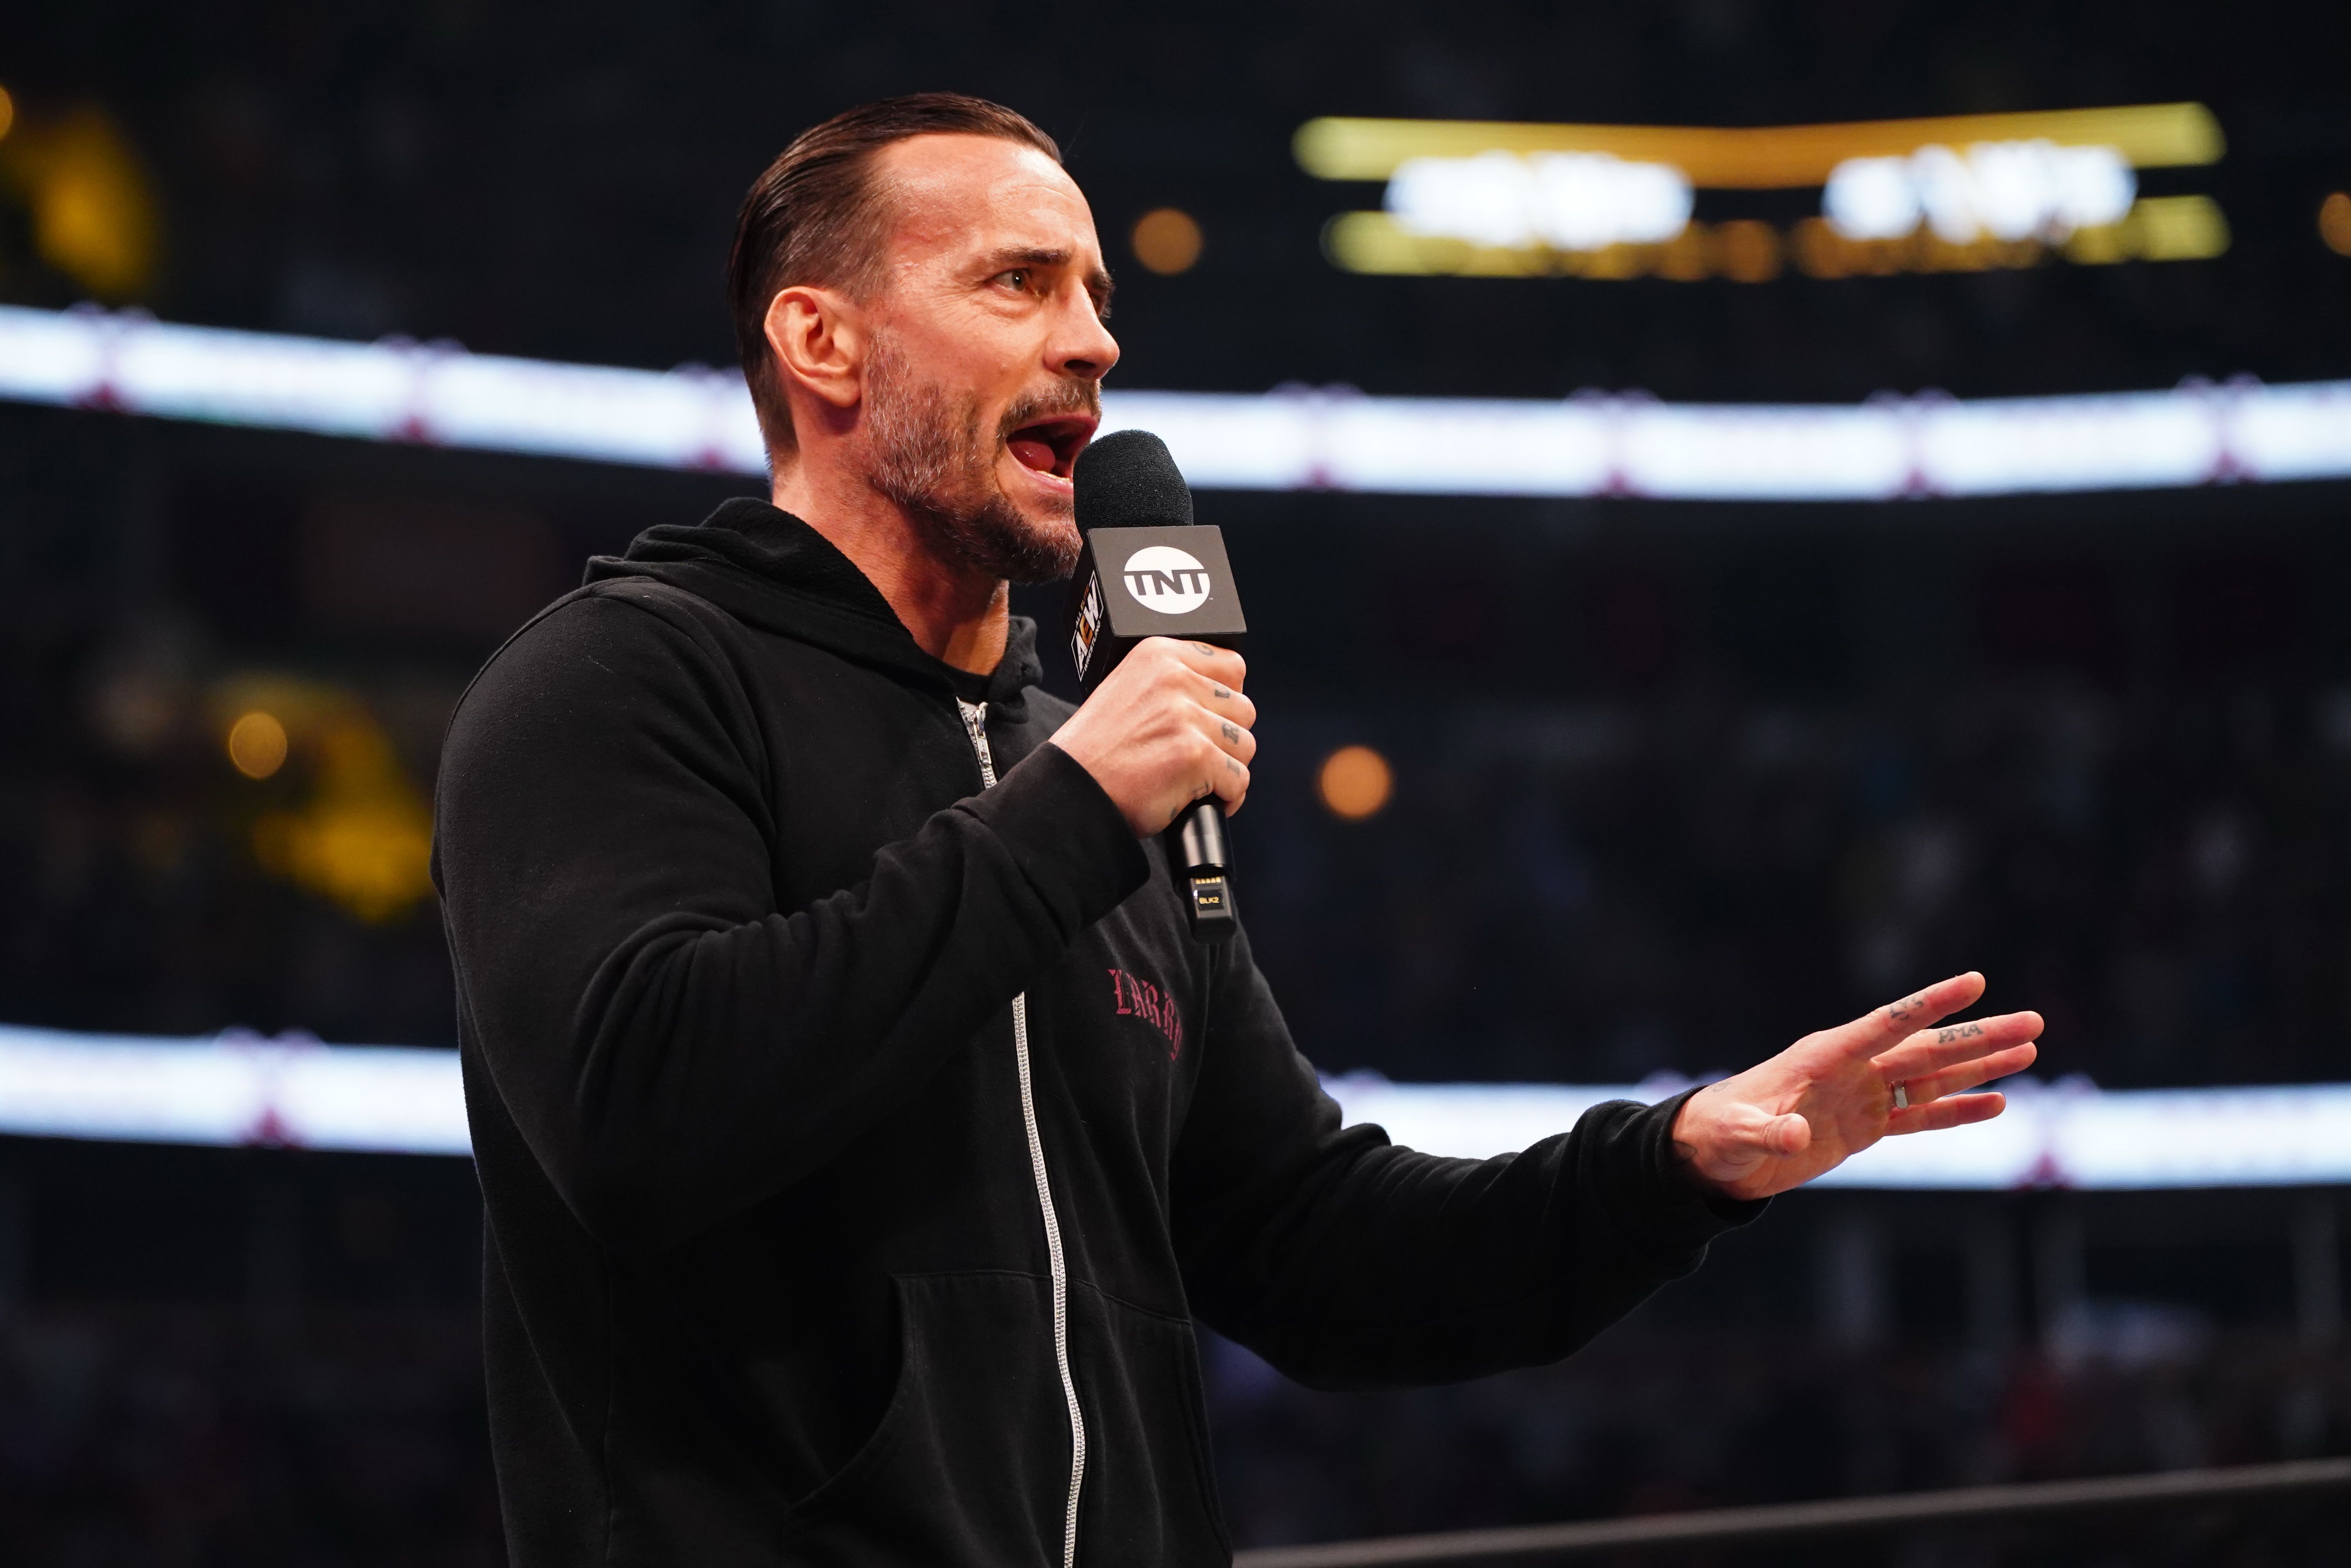 Cm Punk Reacts To Fan Offering Him A Beer On Aew Rampage